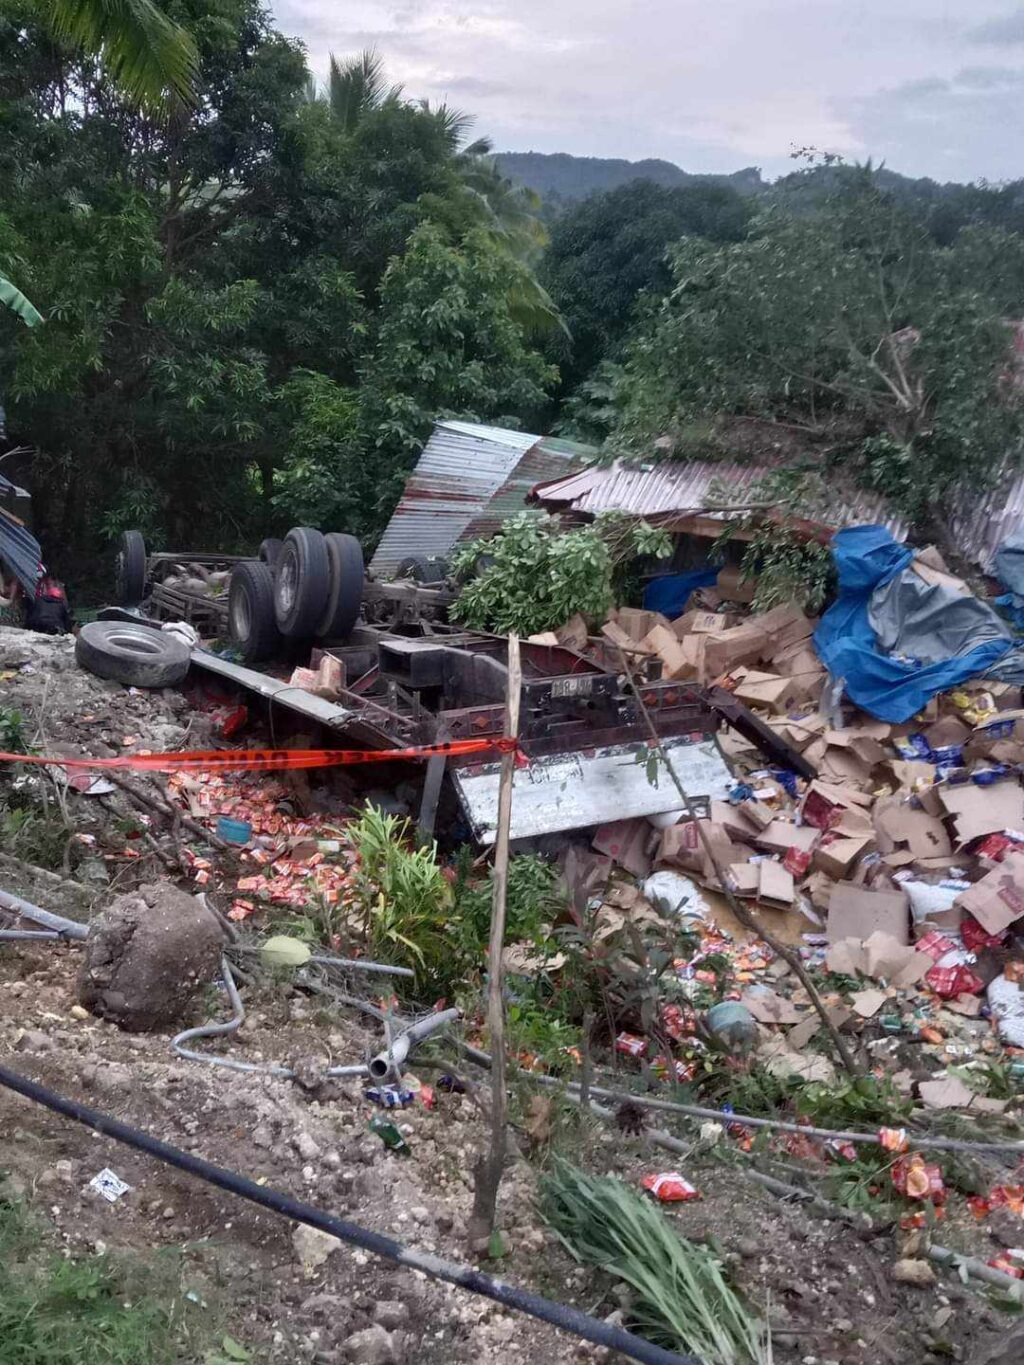 Two men died after the truck they were in fell off a ravine in Barangay Libjo in Tabogon town in northern Cebu. | Jay Muñoz Bragat via Futch Anthony Inso